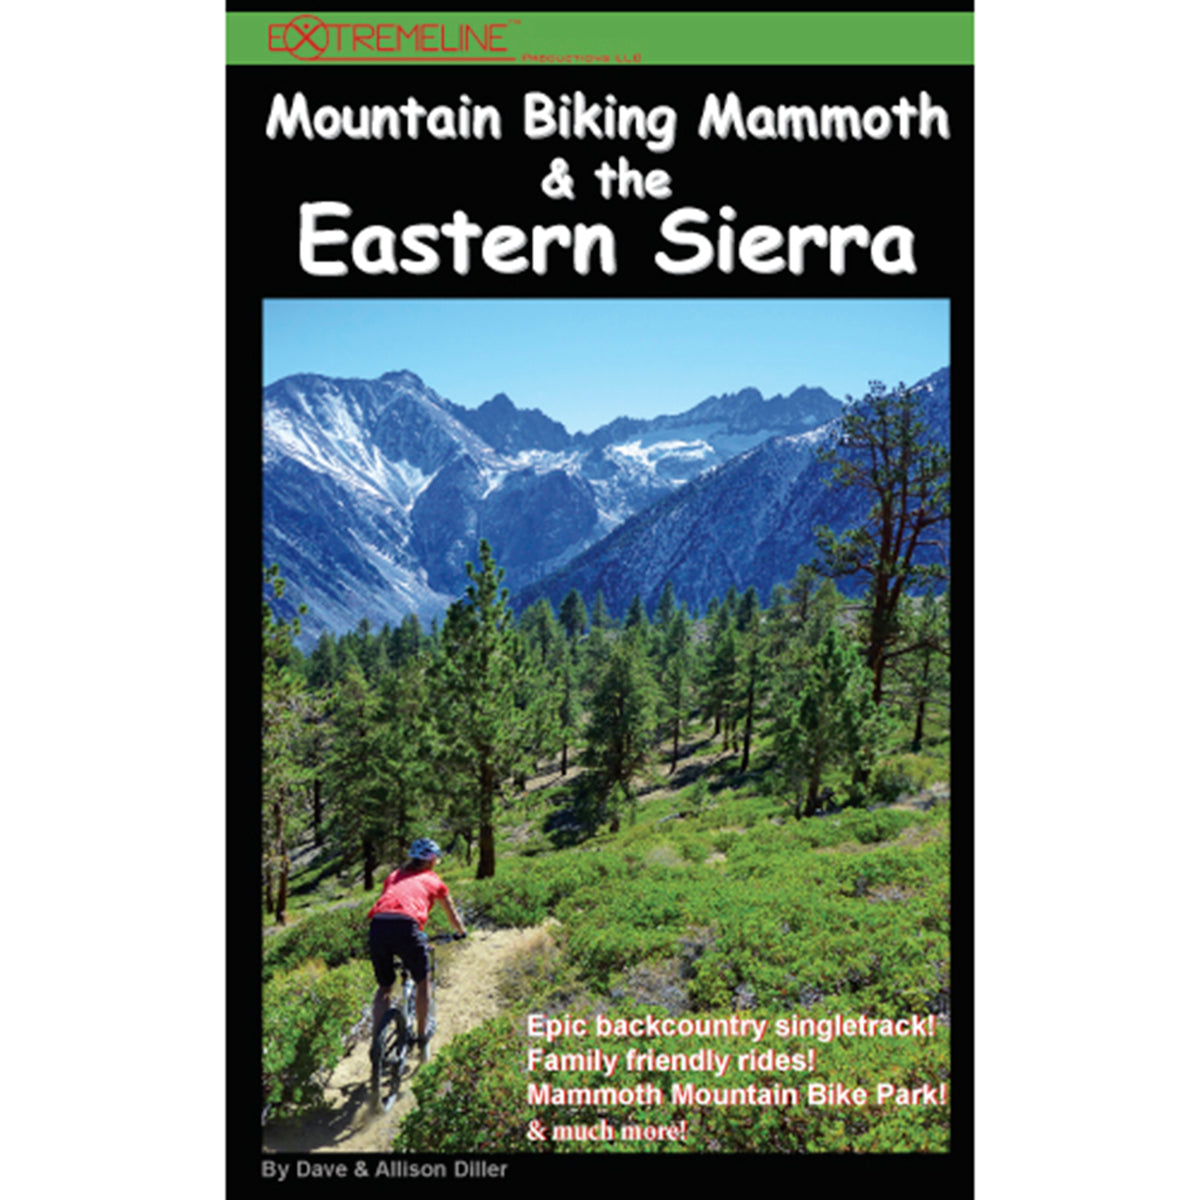 A person rides down the logging flat trail on the cover of the eastern sierra and mammoth mountain biking book